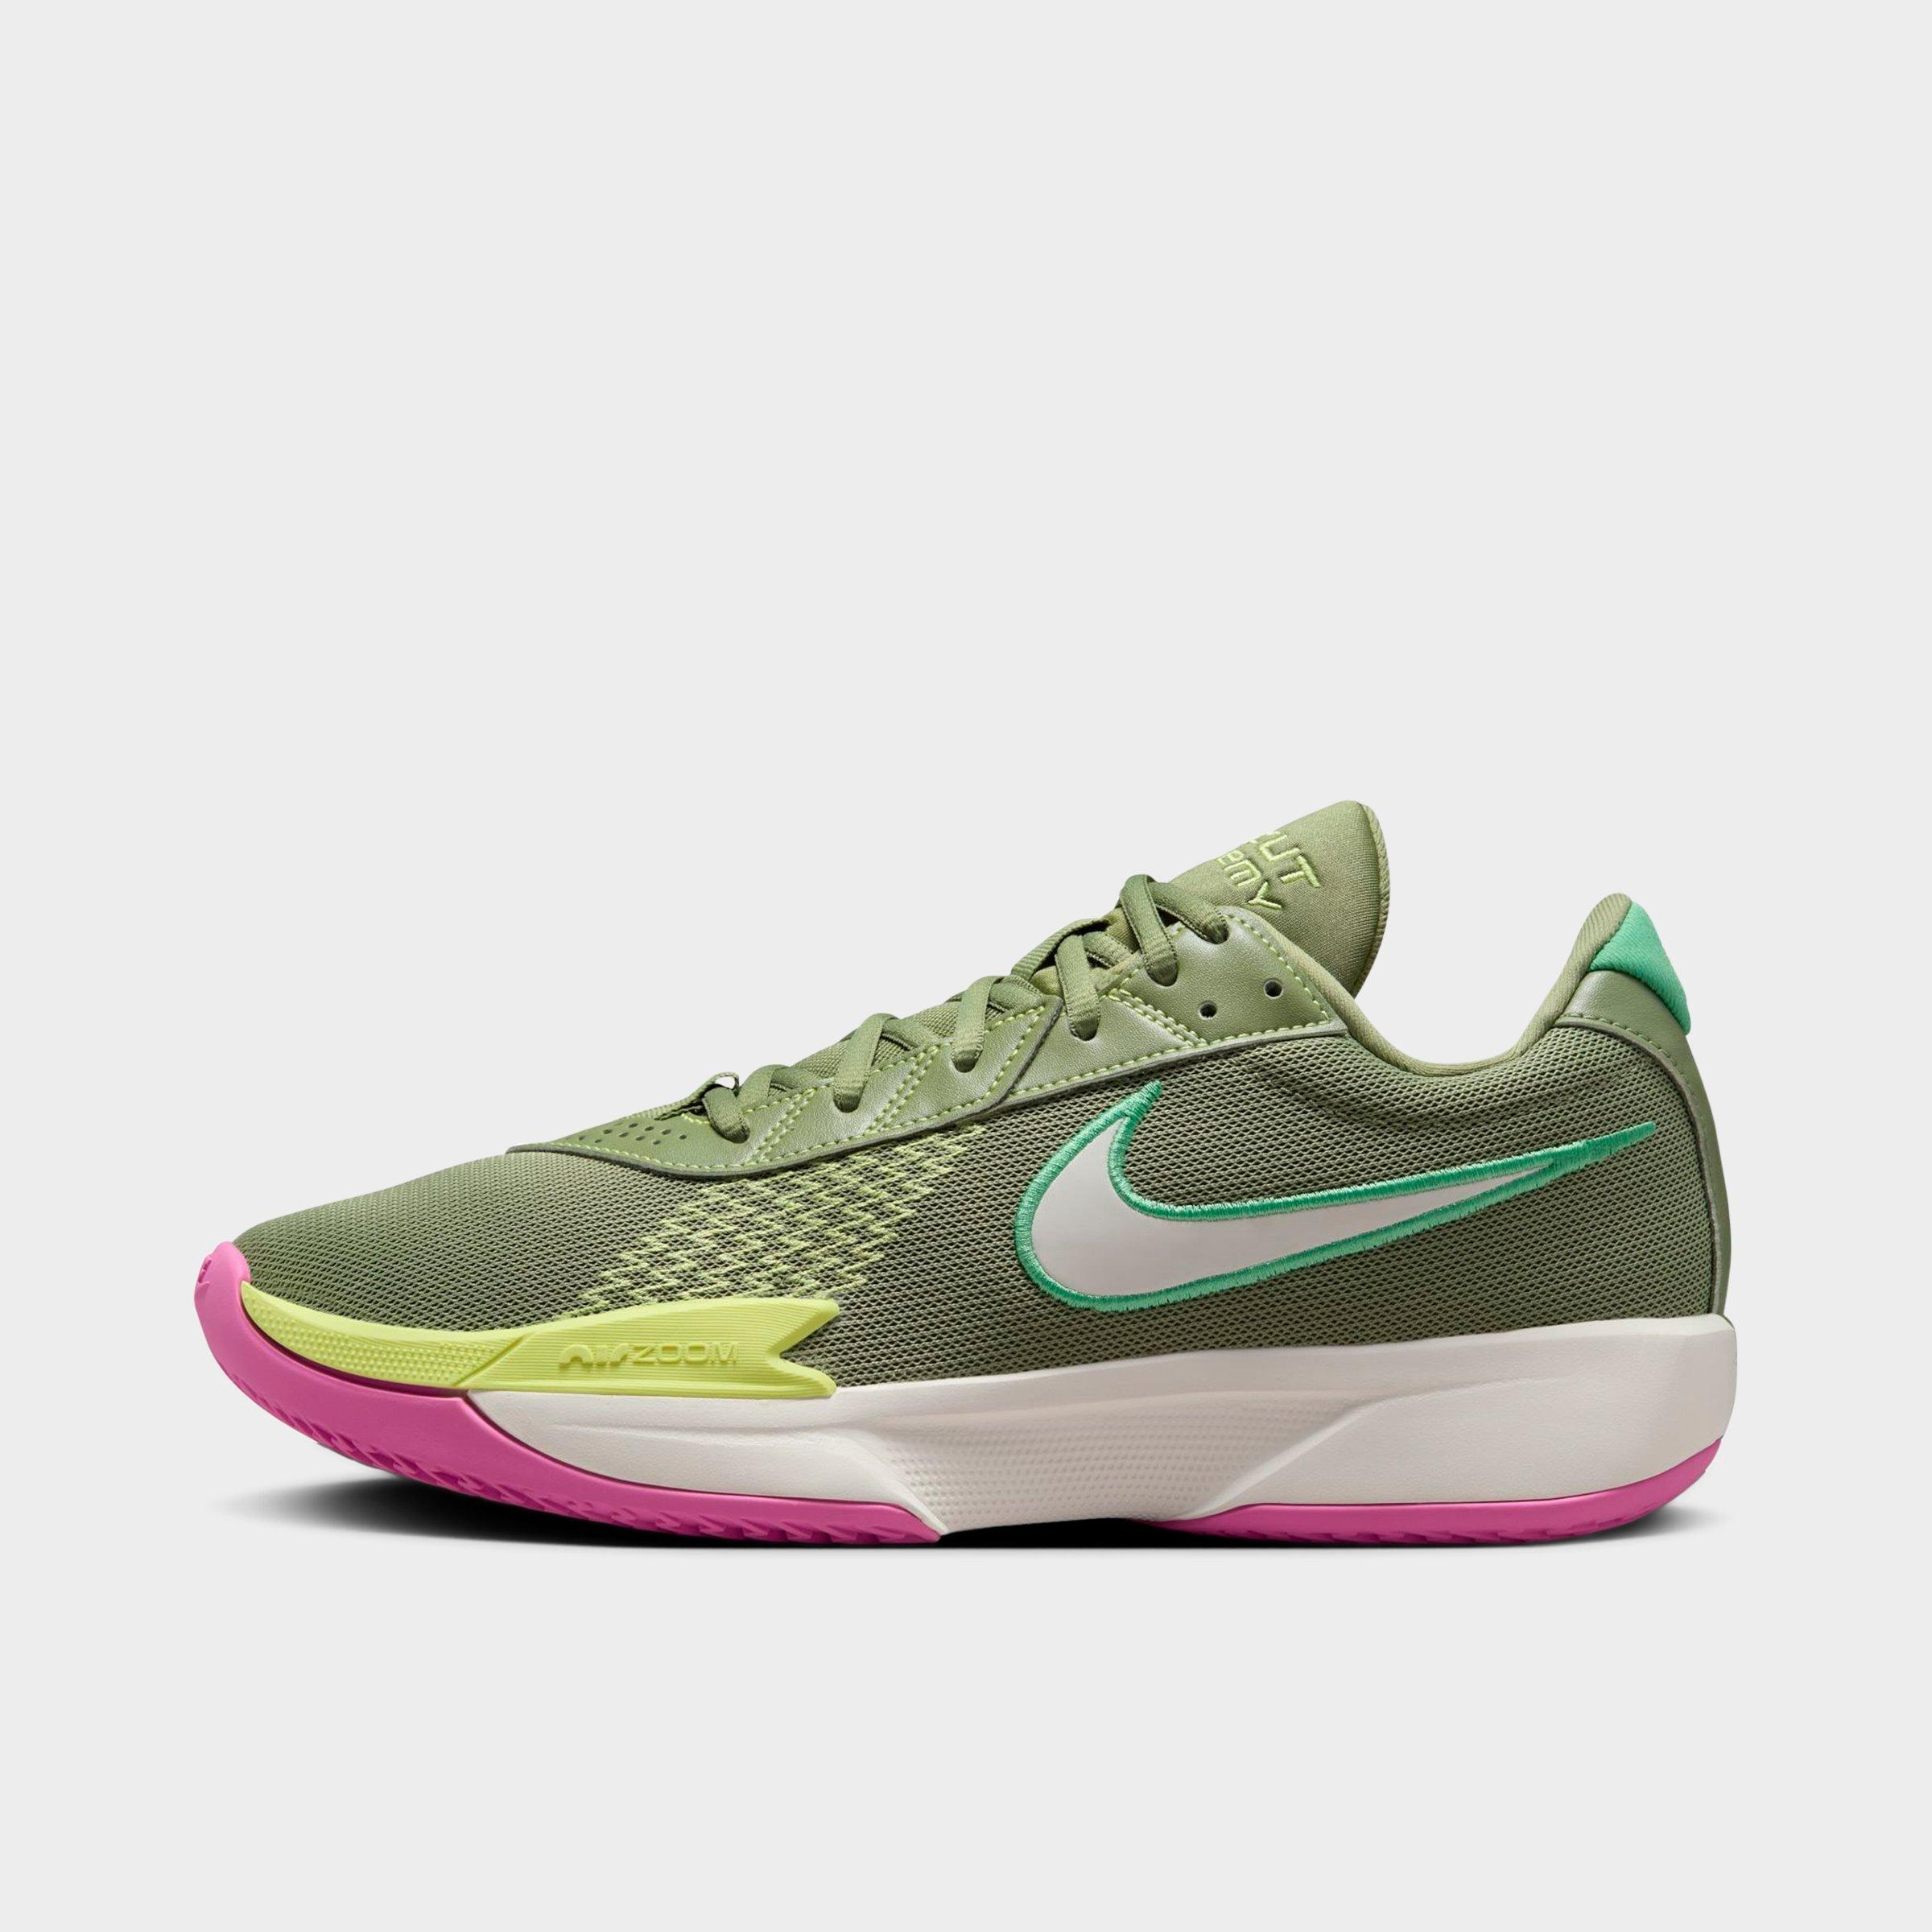 Nike G. T. Cut Academy Basketball Shoes Size 14.0 In Oil Green/spring Green/light Lemon Twist/sail